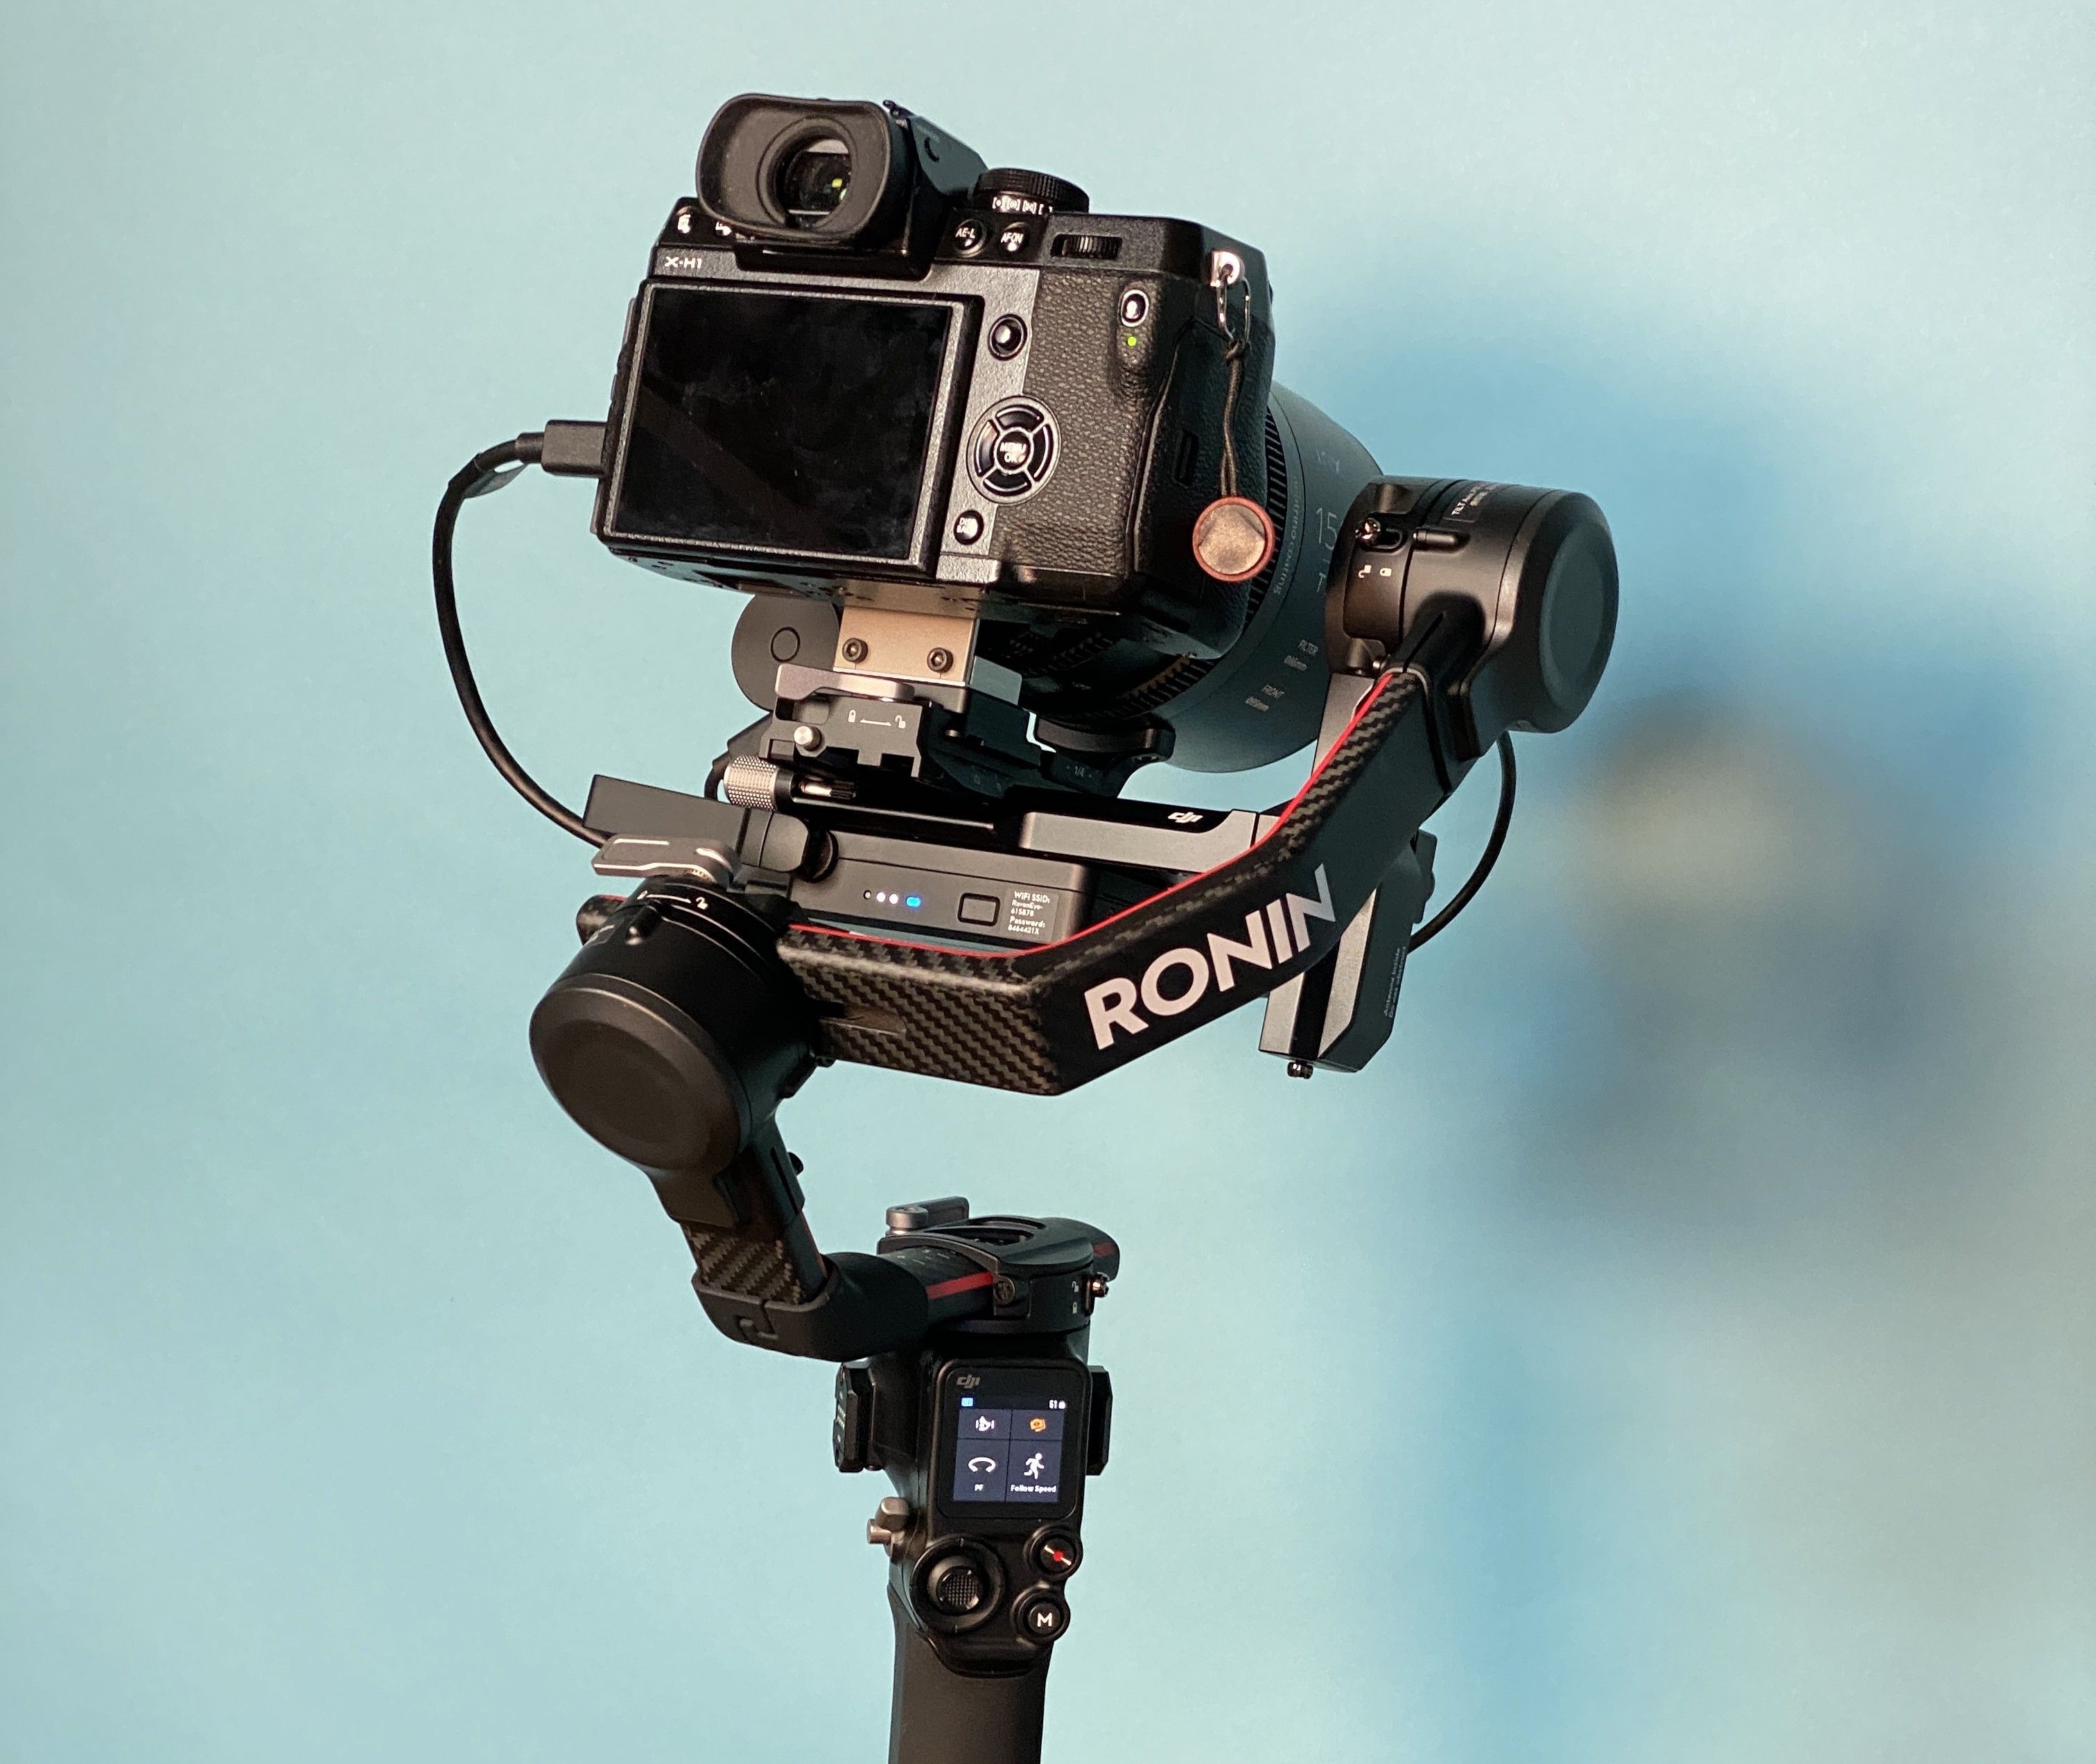 Ronin the Sequel: Hands on with the RS 2 and RSC 2 Gimbals